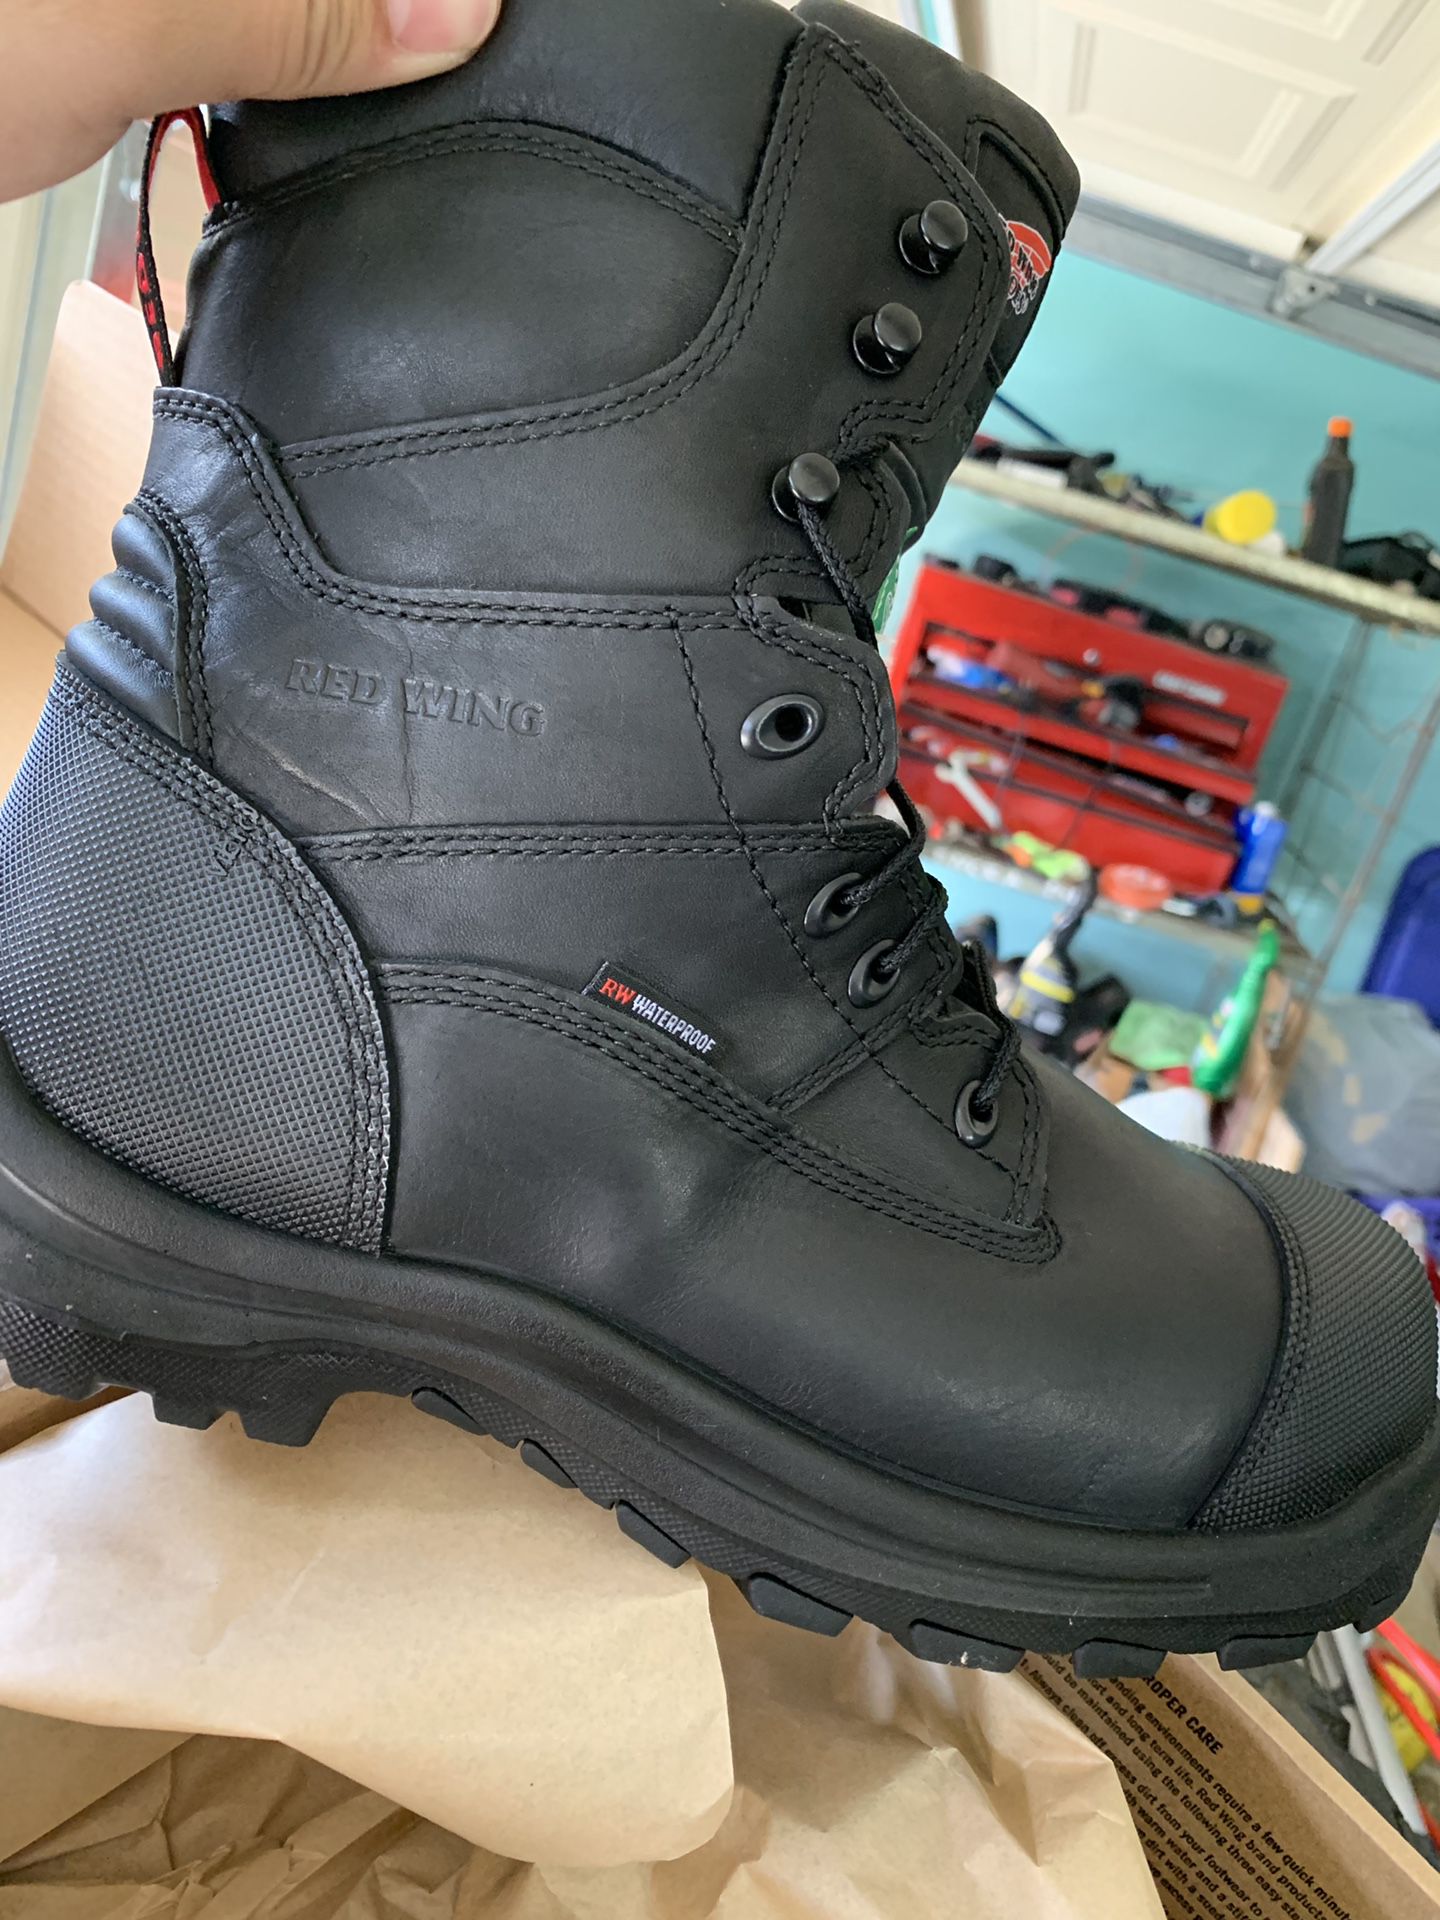 BRAND NEW RED WING BOOTS ! Size 10